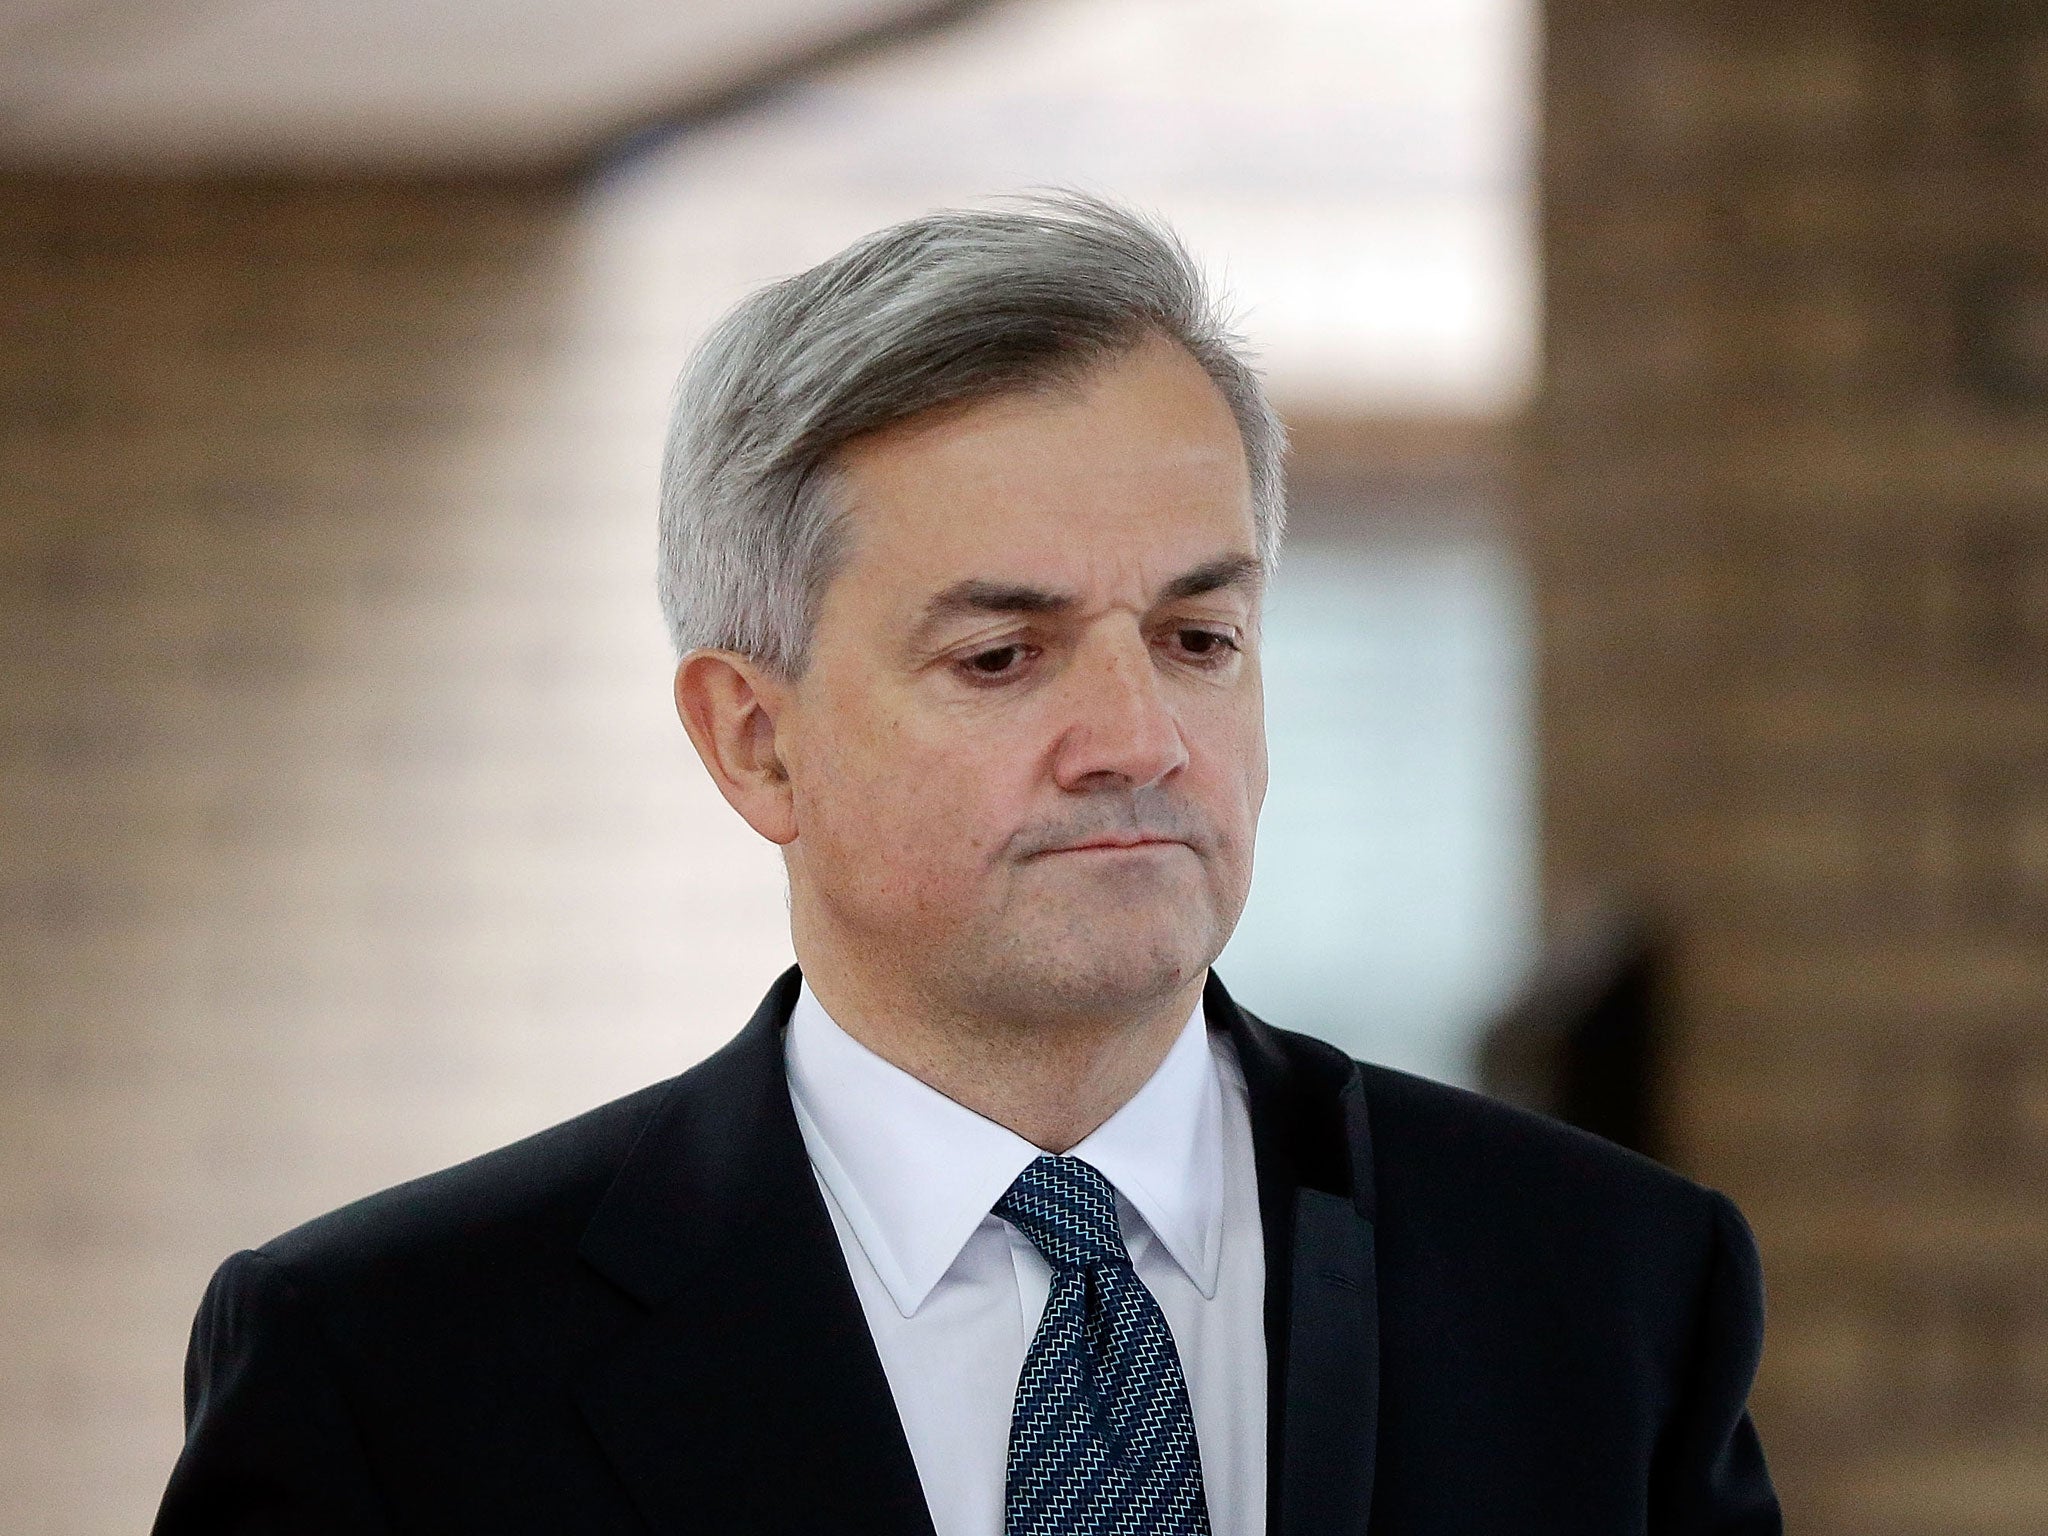 Former Cabinet Minister Chris Huhne leaves Southwark Crown Court to make a statement on February 4, 2013 in London, England